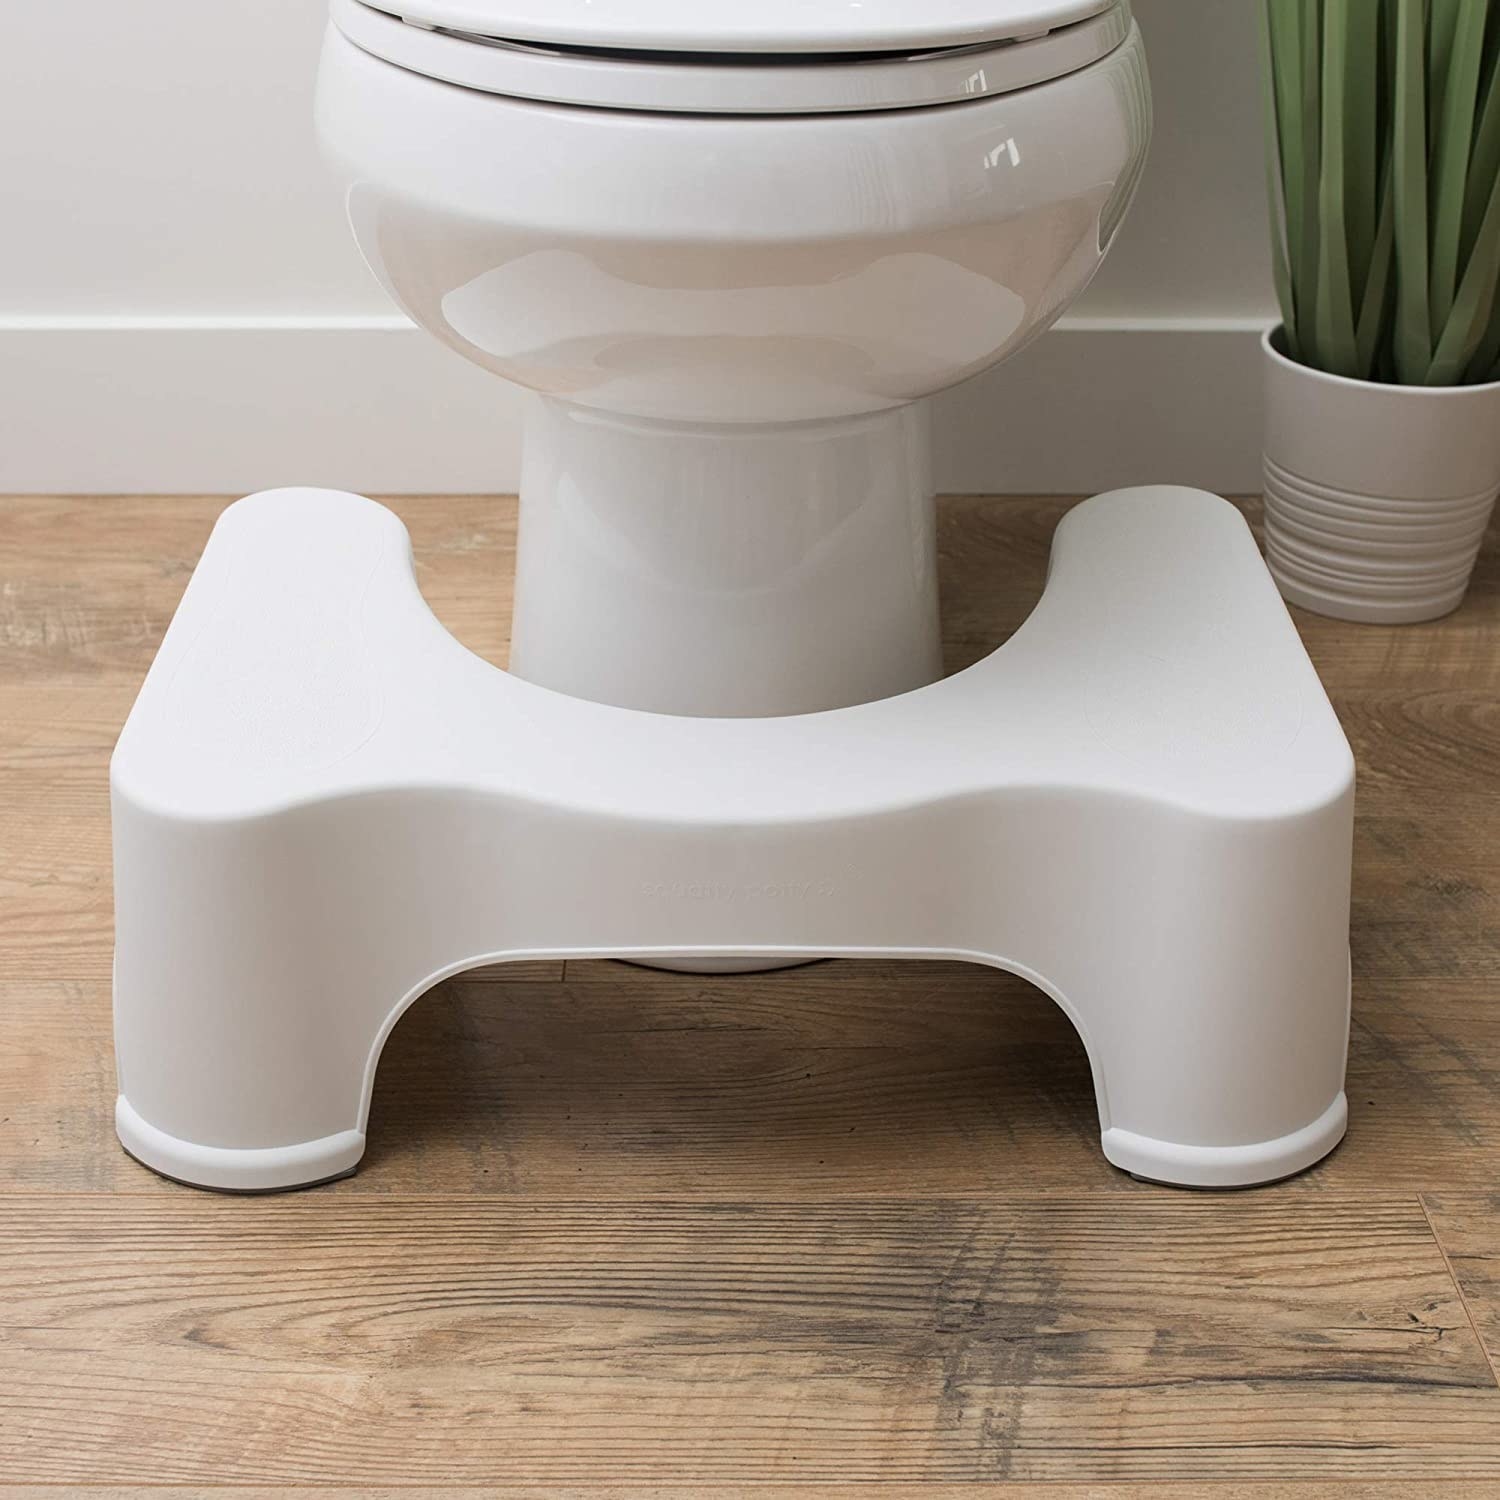 Squatty Potty in front of a toilet